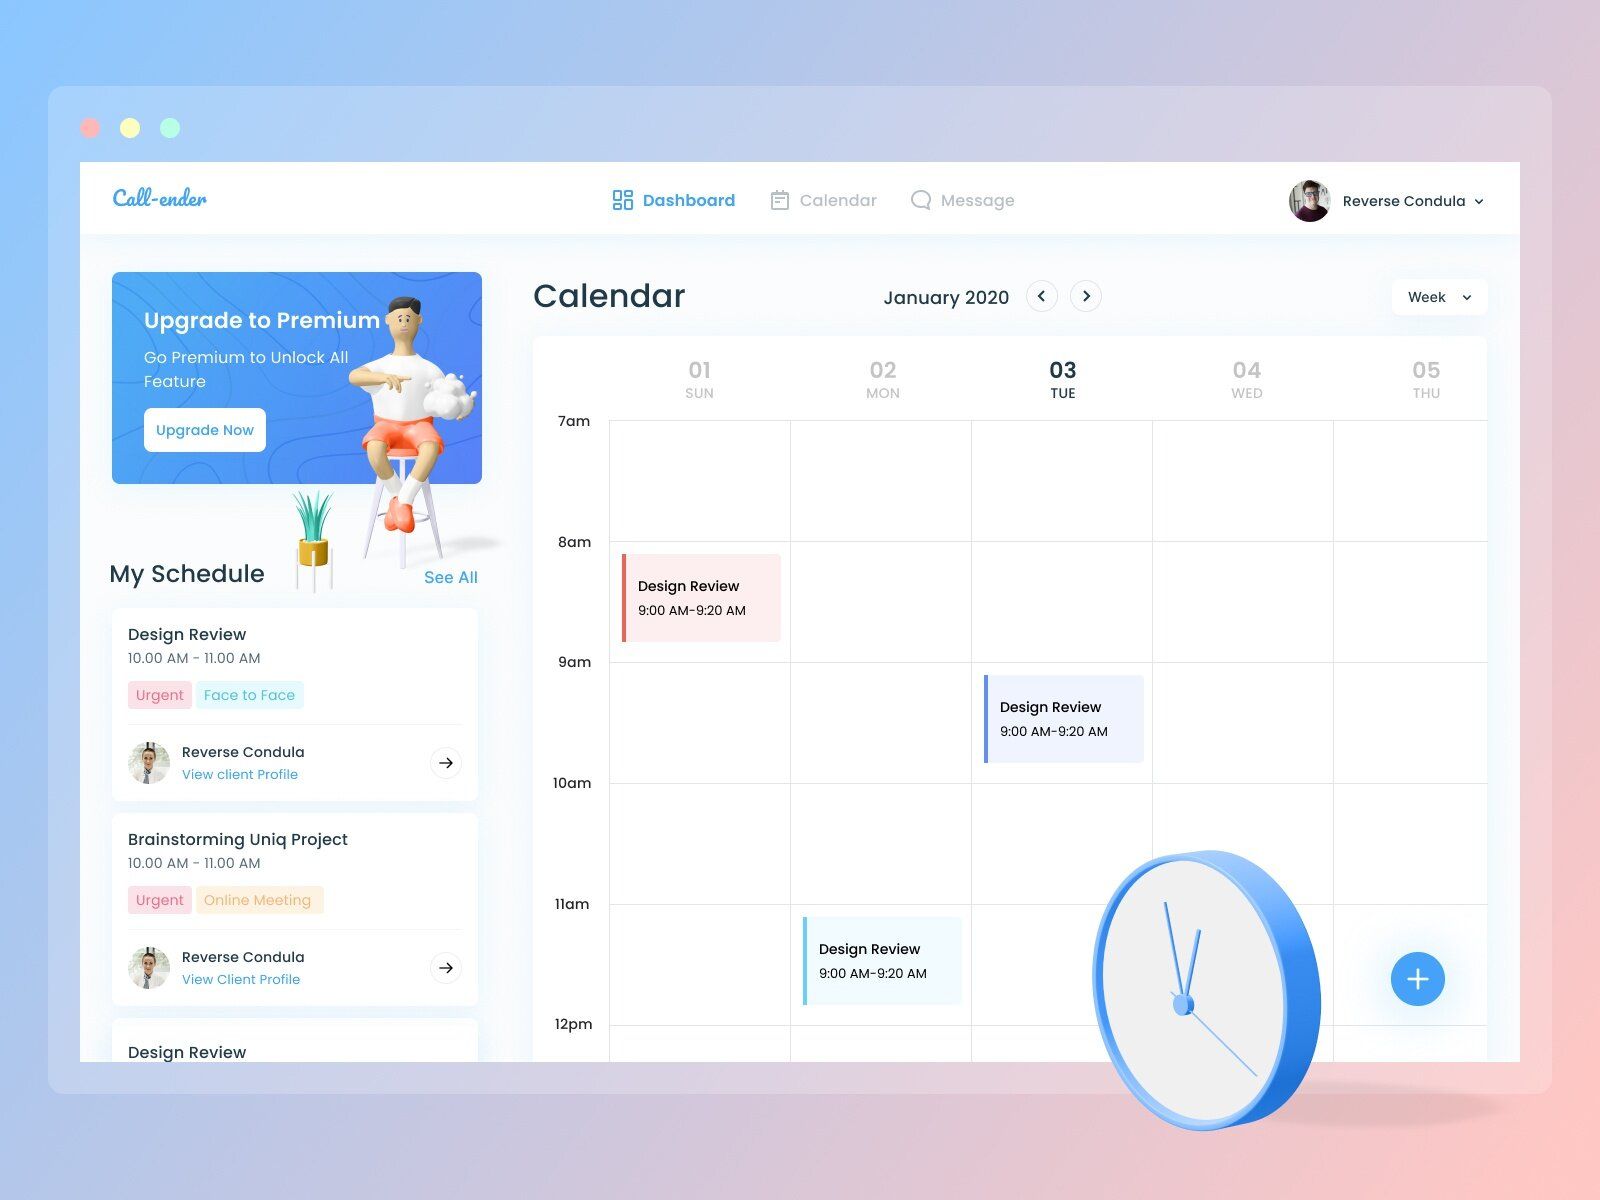 Calendar (*image by [Dicky Indrayan](https://dribbble.com/dickyindrayan){ rel="nofollow" .default-md}*)